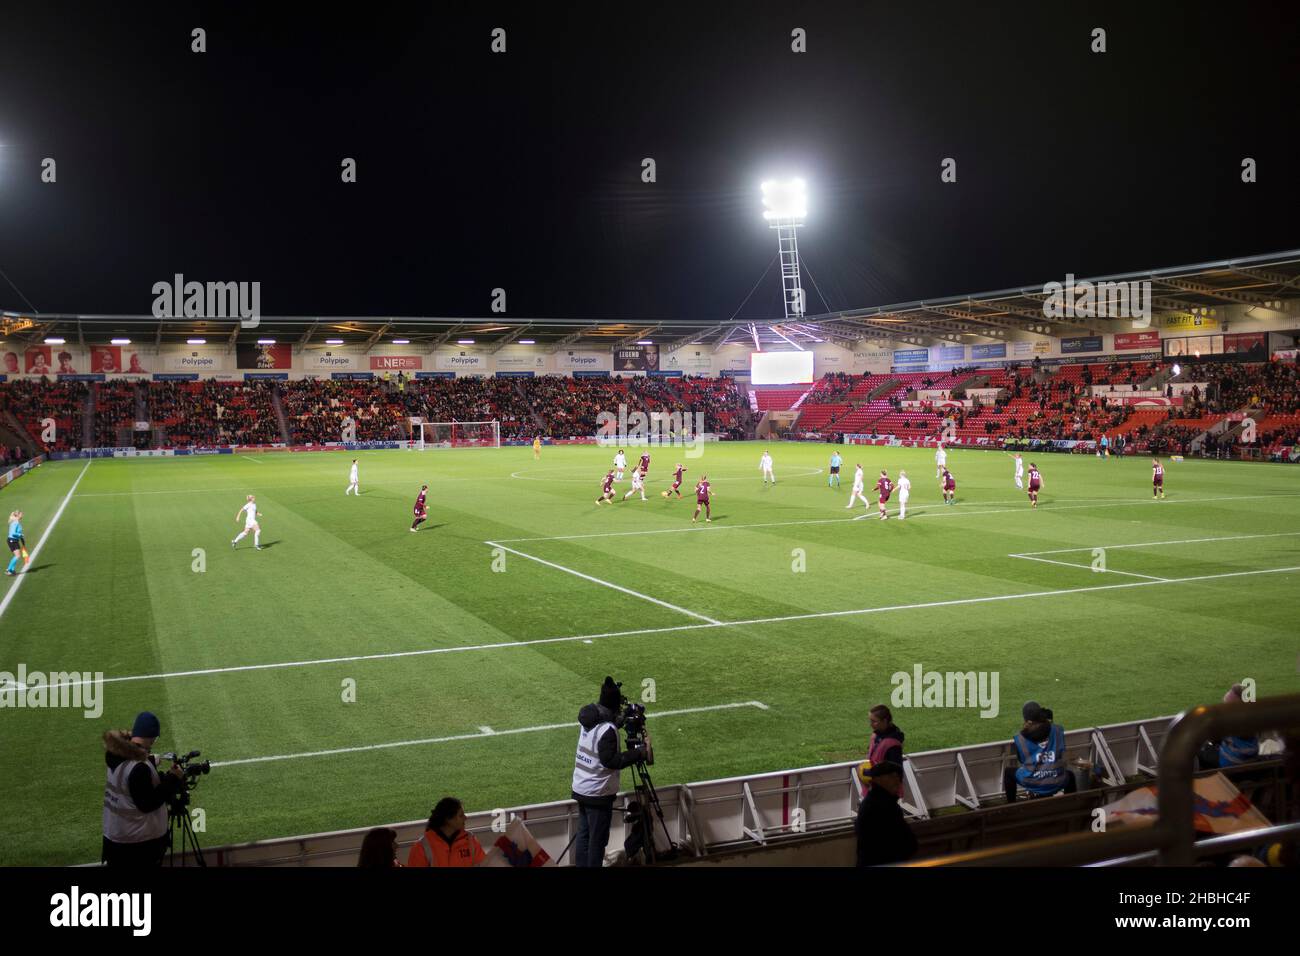 dh Stadiums DONCASTER UK England lionesses woman football team playing Latvia at womans soccer in stadium field women team winning 20-0 womens Stock Photo